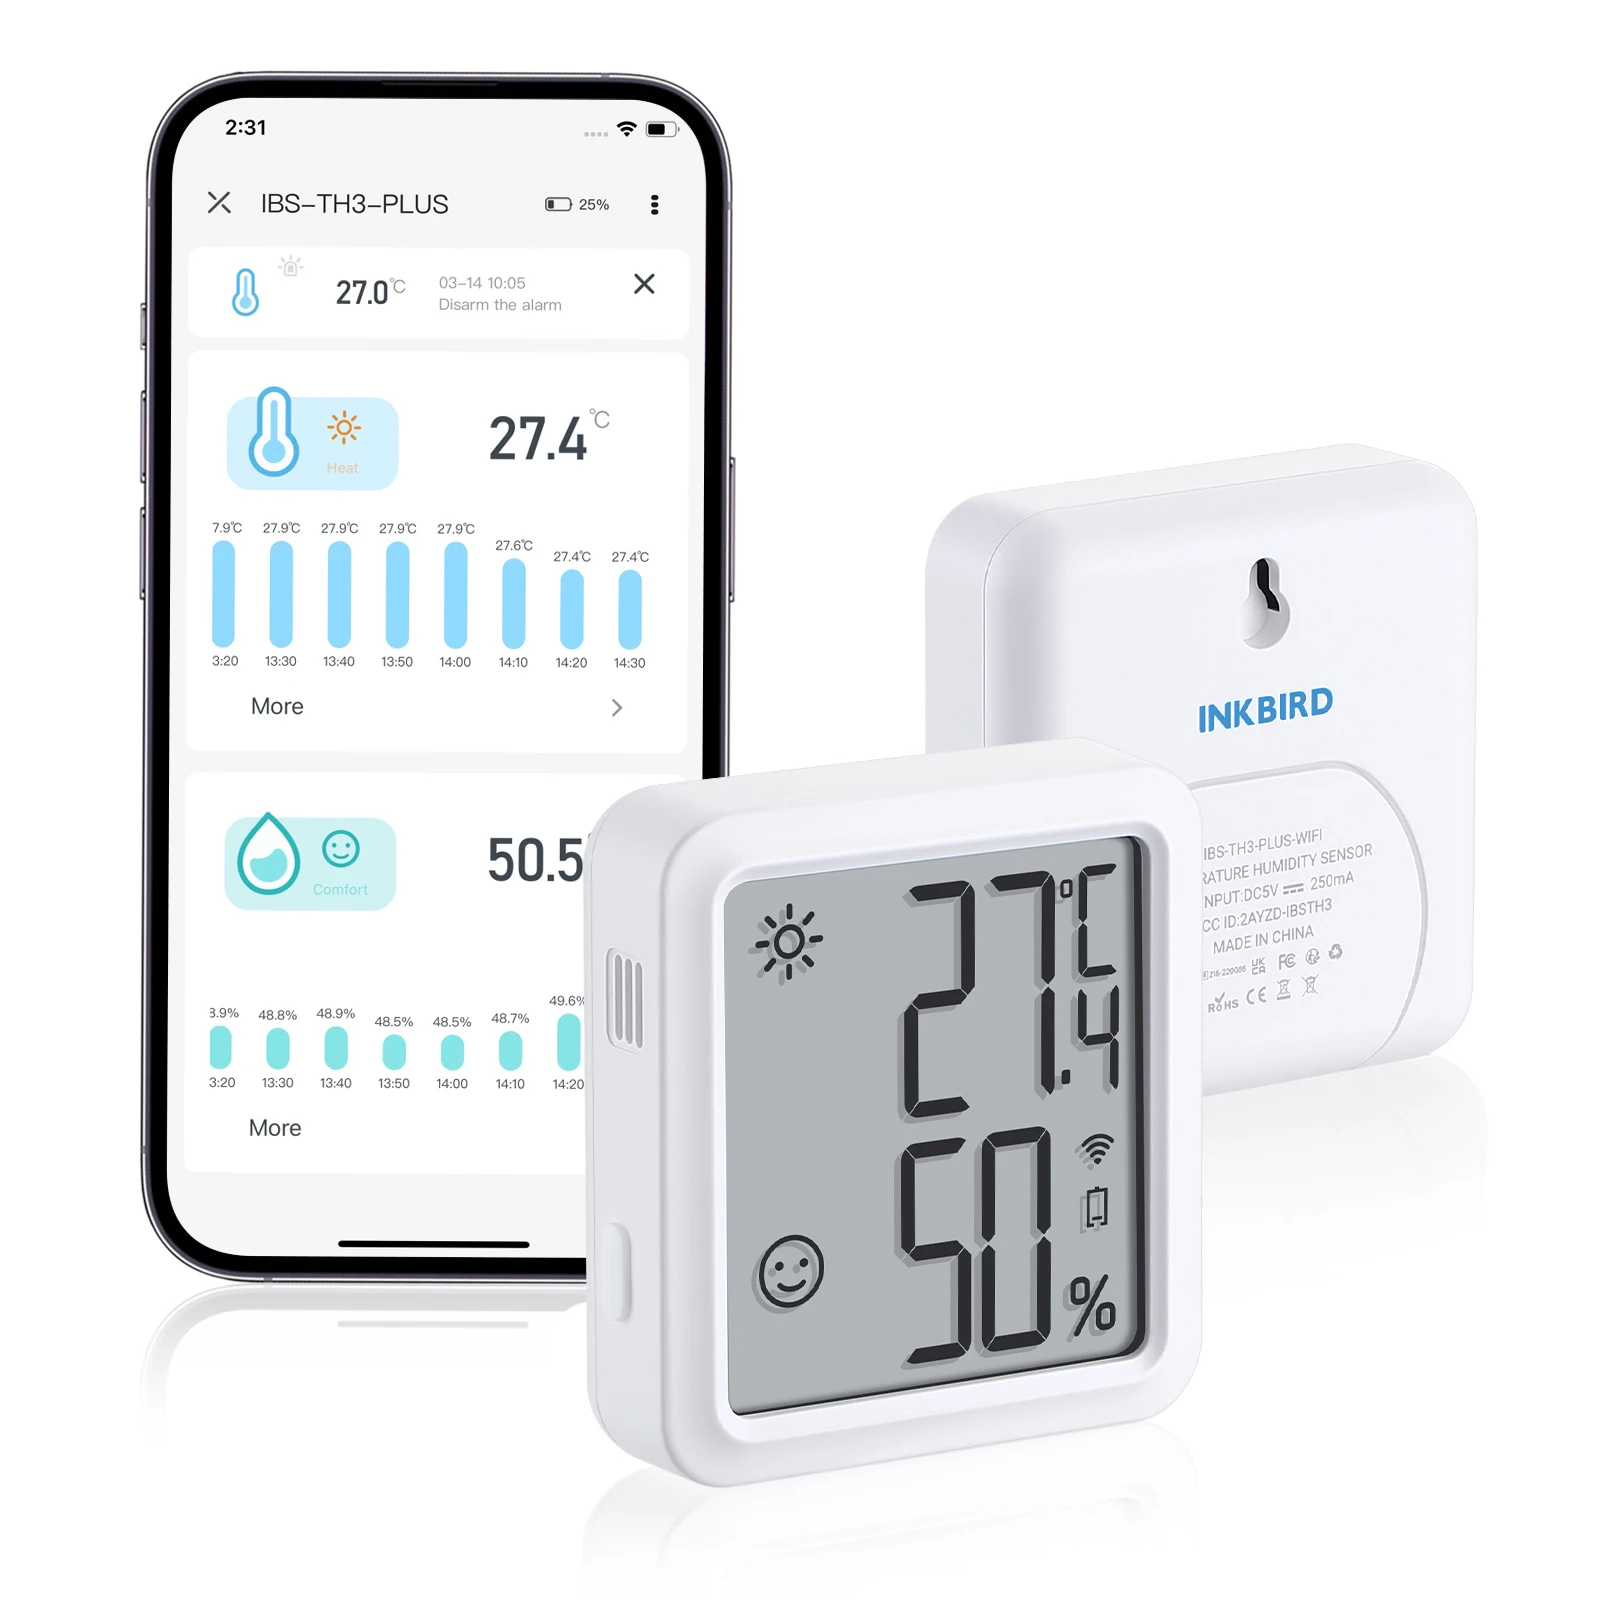 

INKBIRD WiFi Thermometer Hygrometer Indoor Digital Temperature Humidity Smart Sensor IBS-TH3-PLUS For Home Weather Station